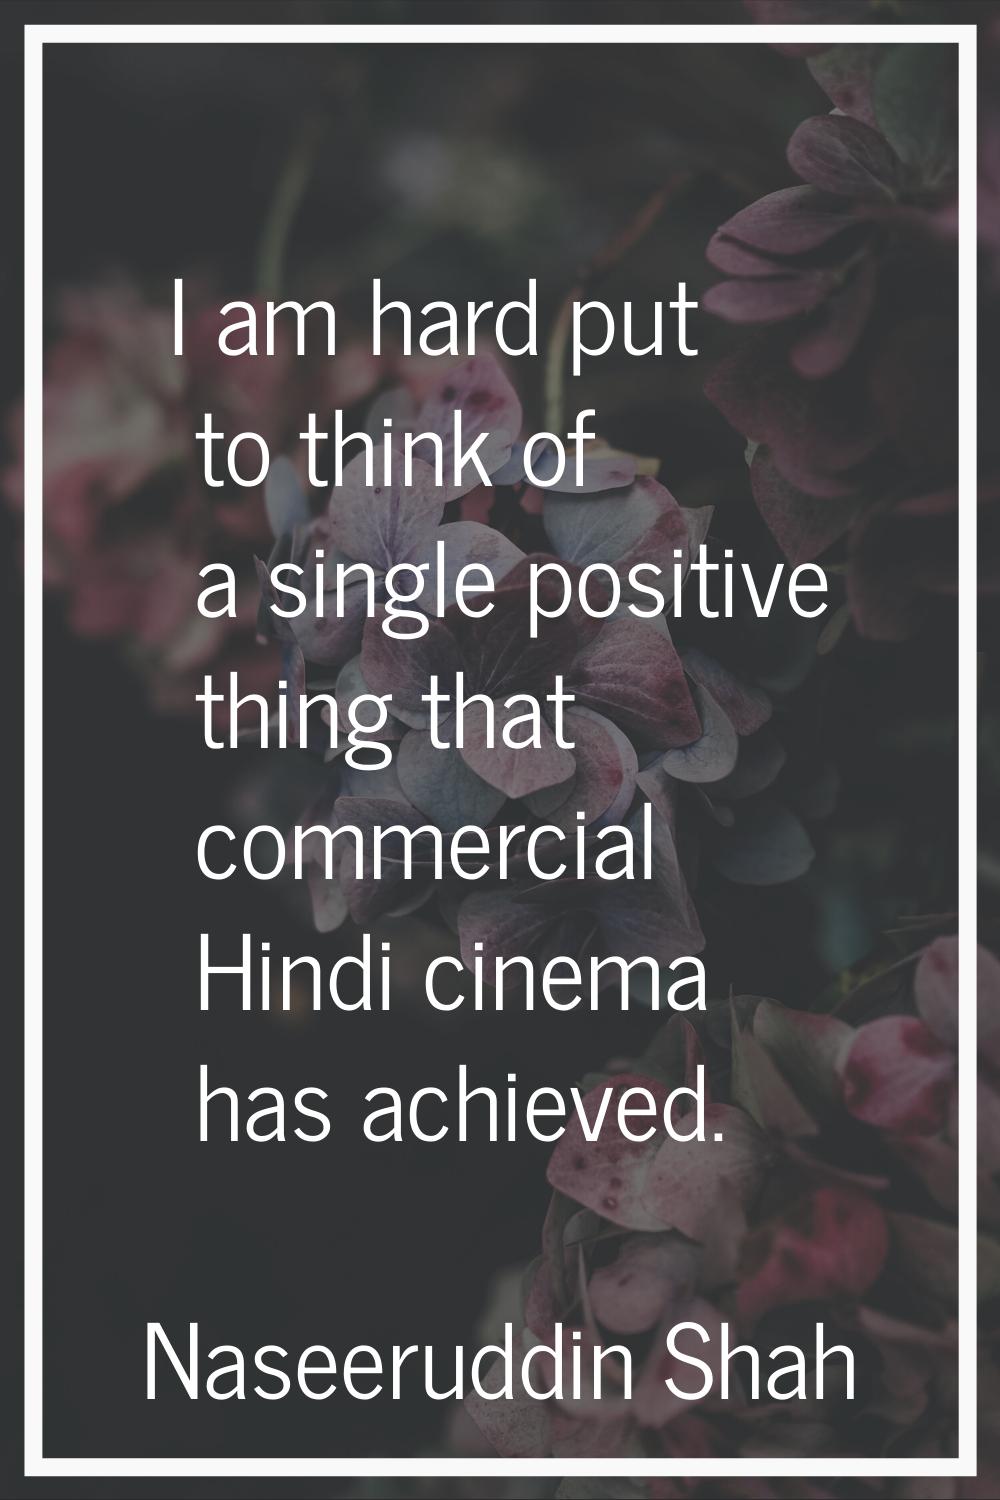 I am hard put to think of a single positive thing that commercial Hindi cinema has achieved.